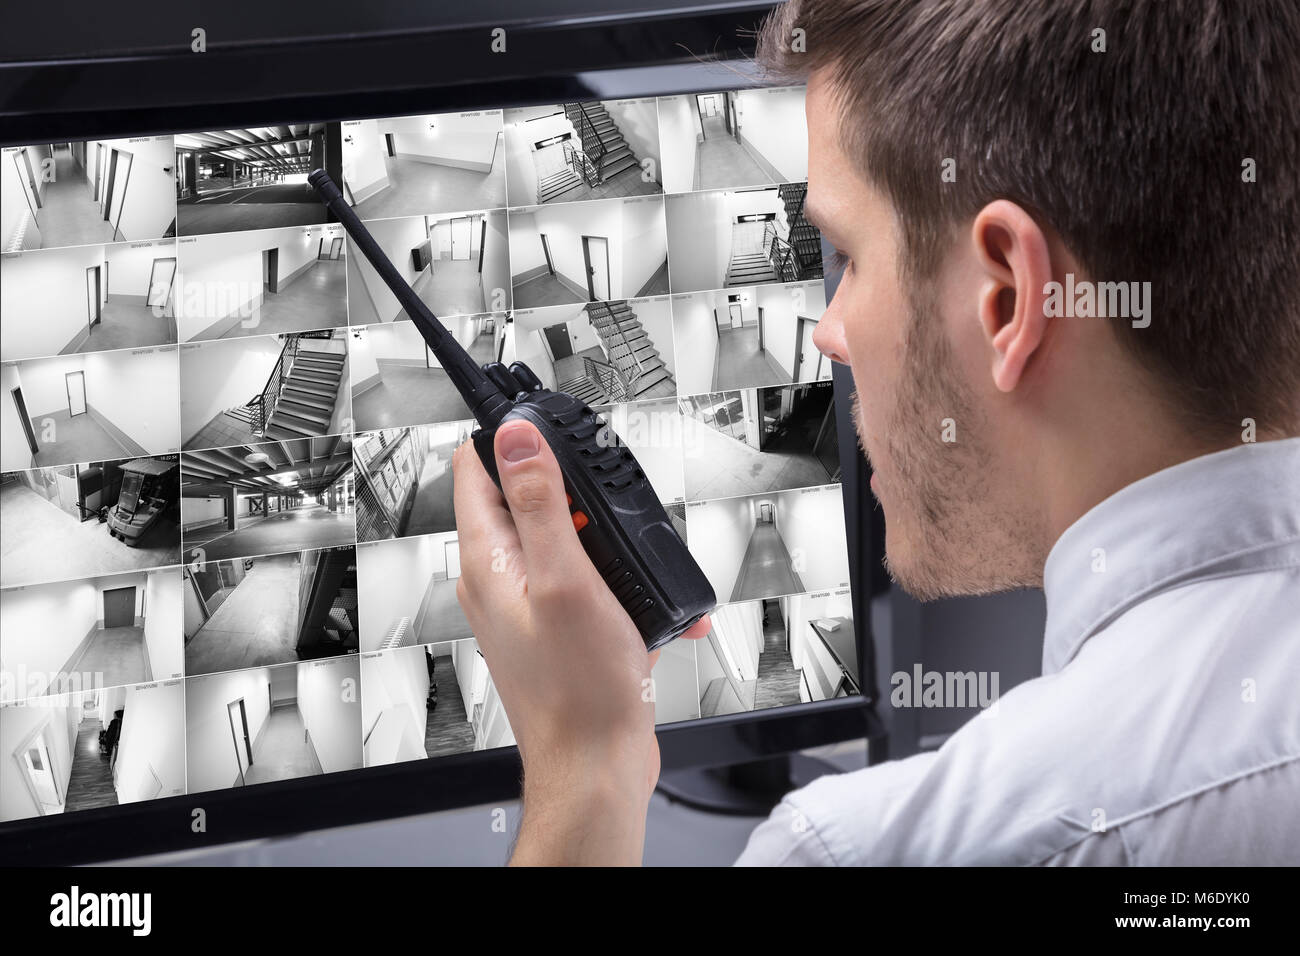 Young Male Security Guard Talking On Walkie-talkie While Monitoring Multiple CCTV Footage On Computer Stock Photo